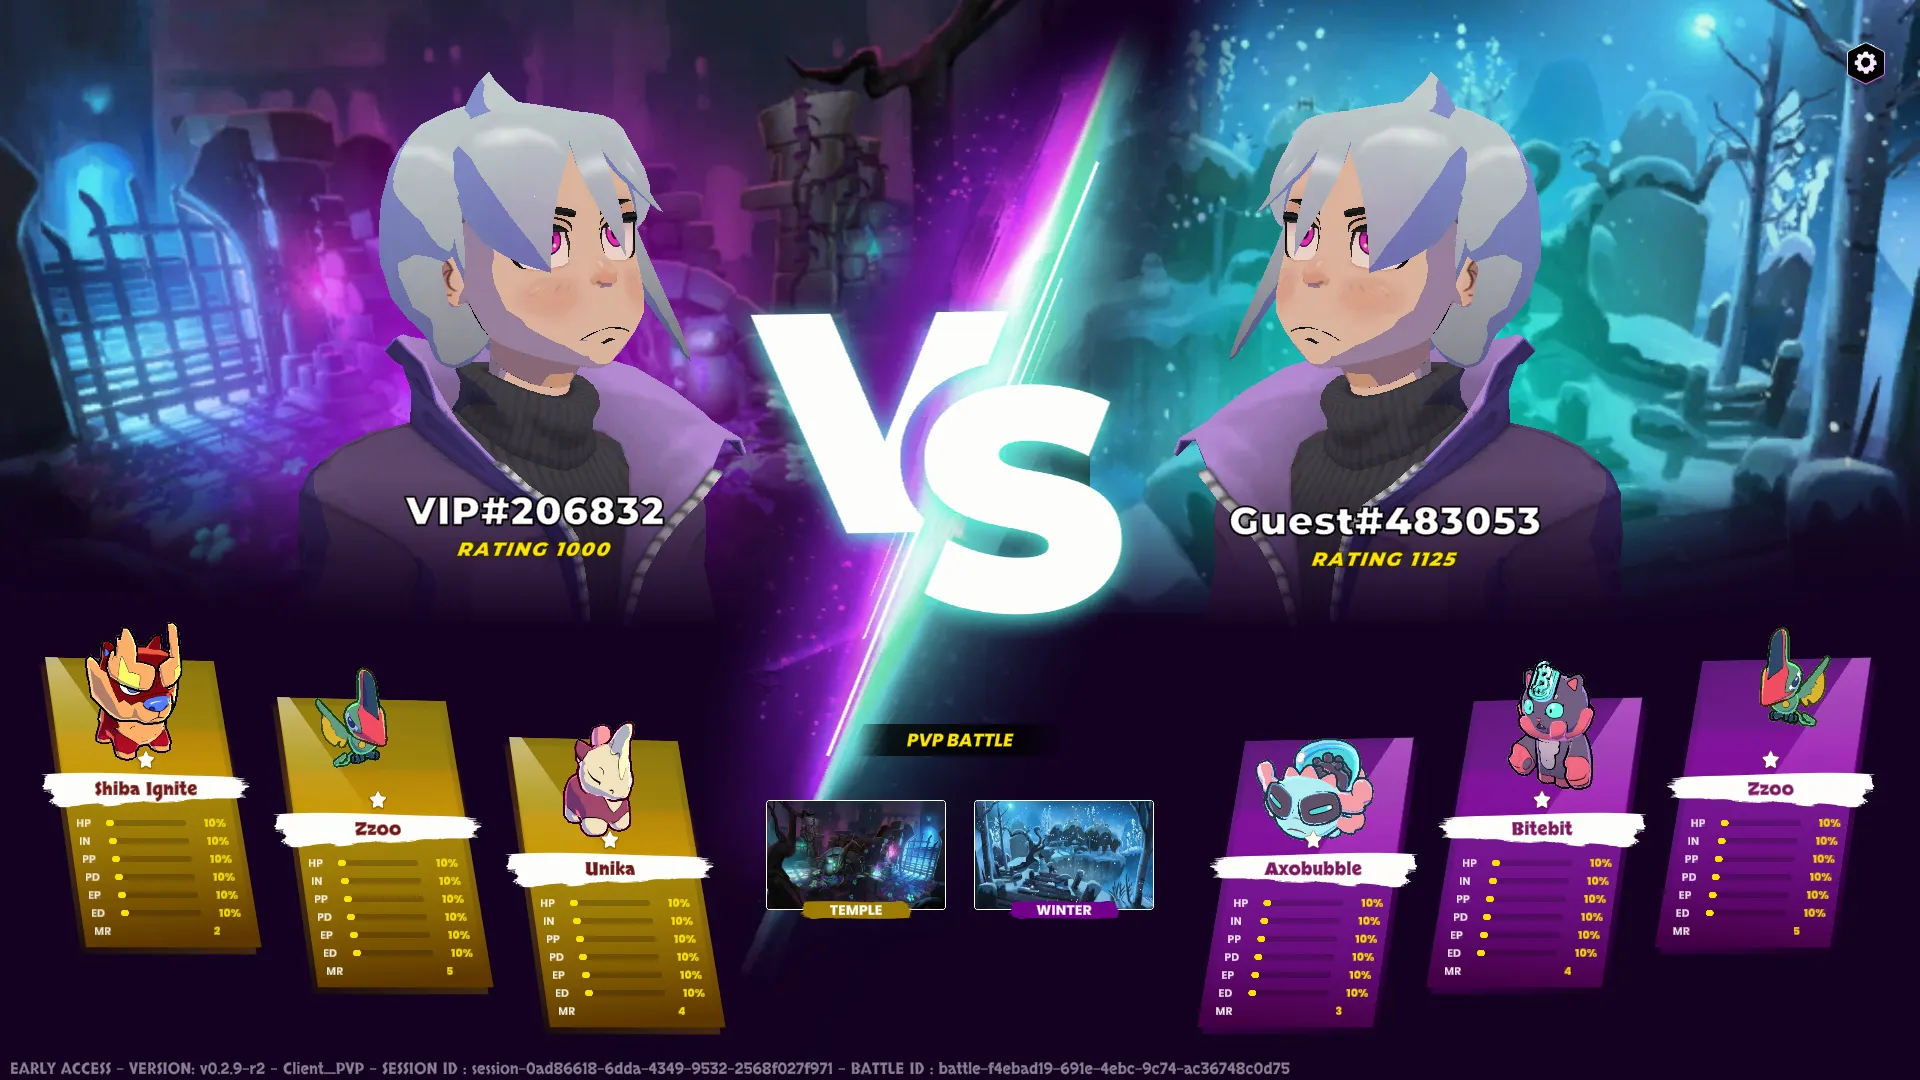 In the match screen, you can see your opponent's Neftie, as well as their stats and rarity. You can also view your opponent's ratings in the game.